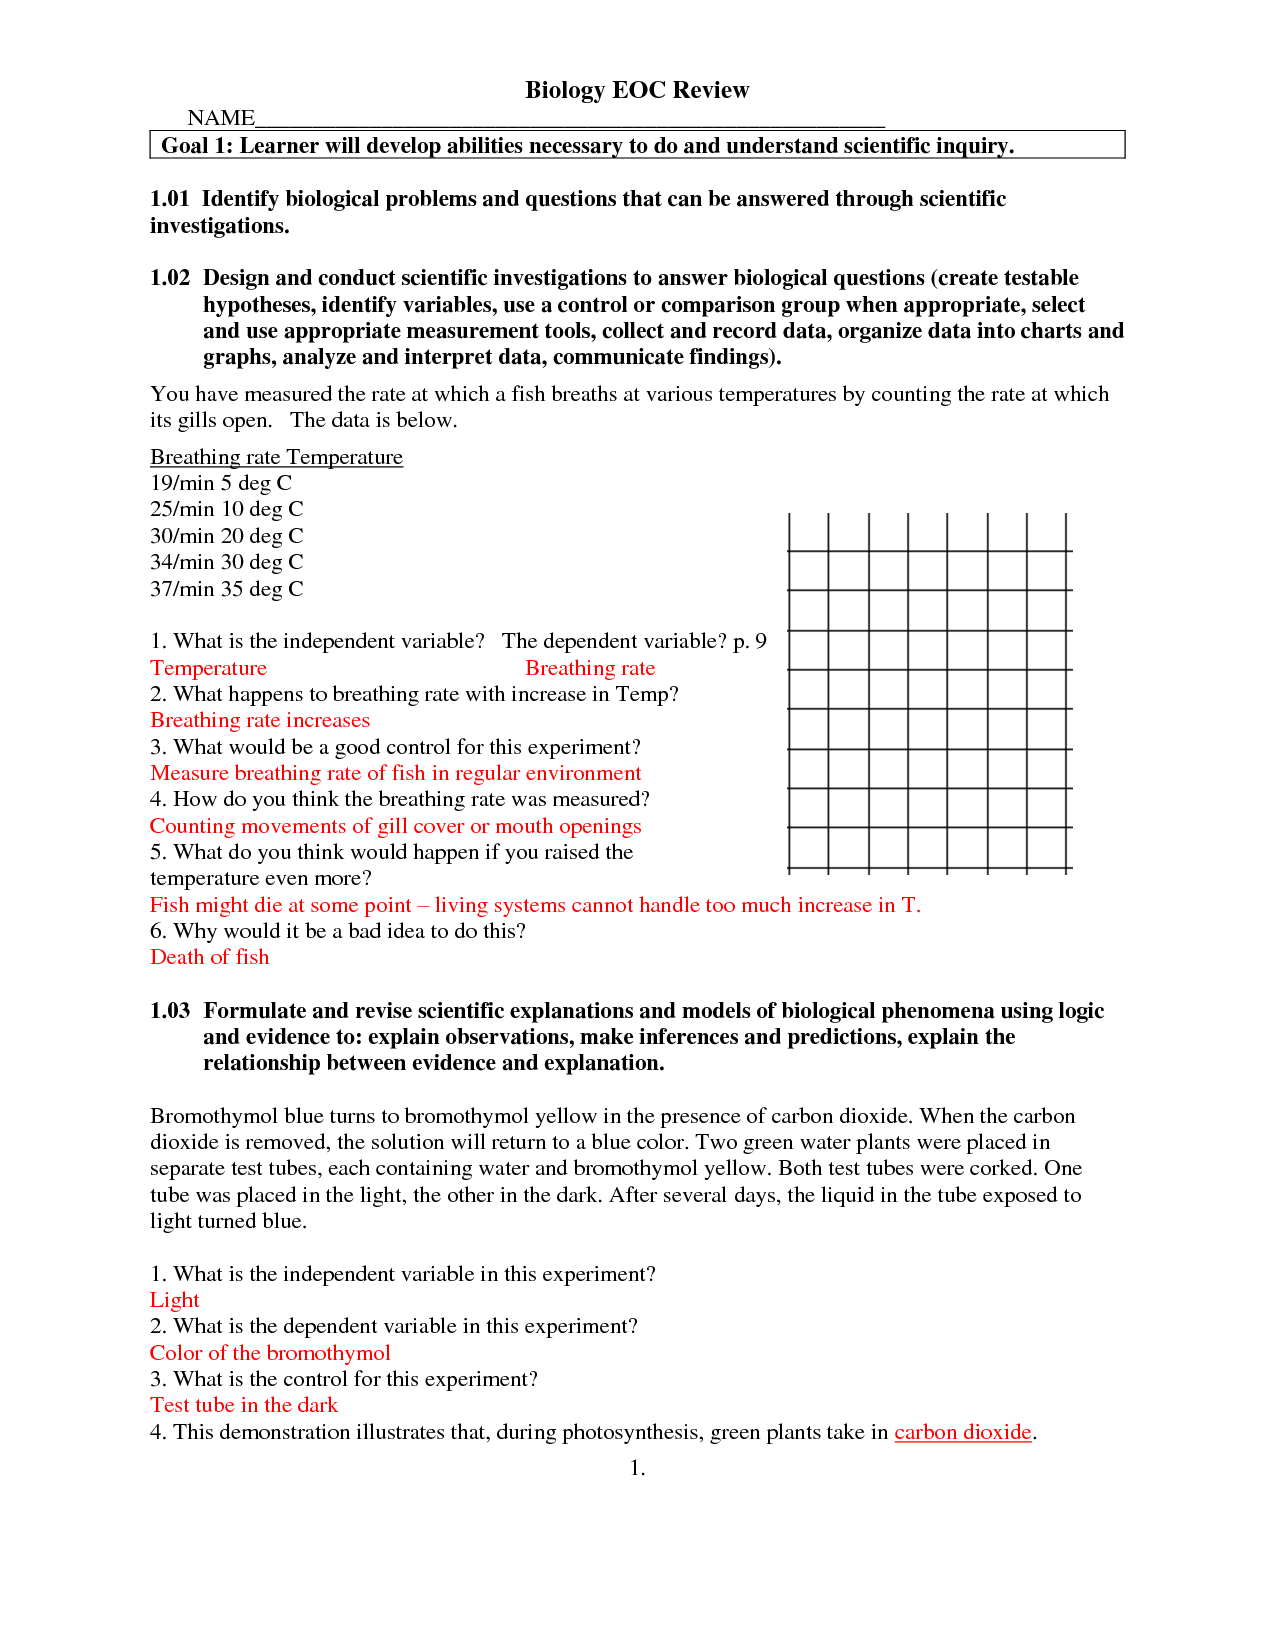 Biology EOC Review Packet Answer Key